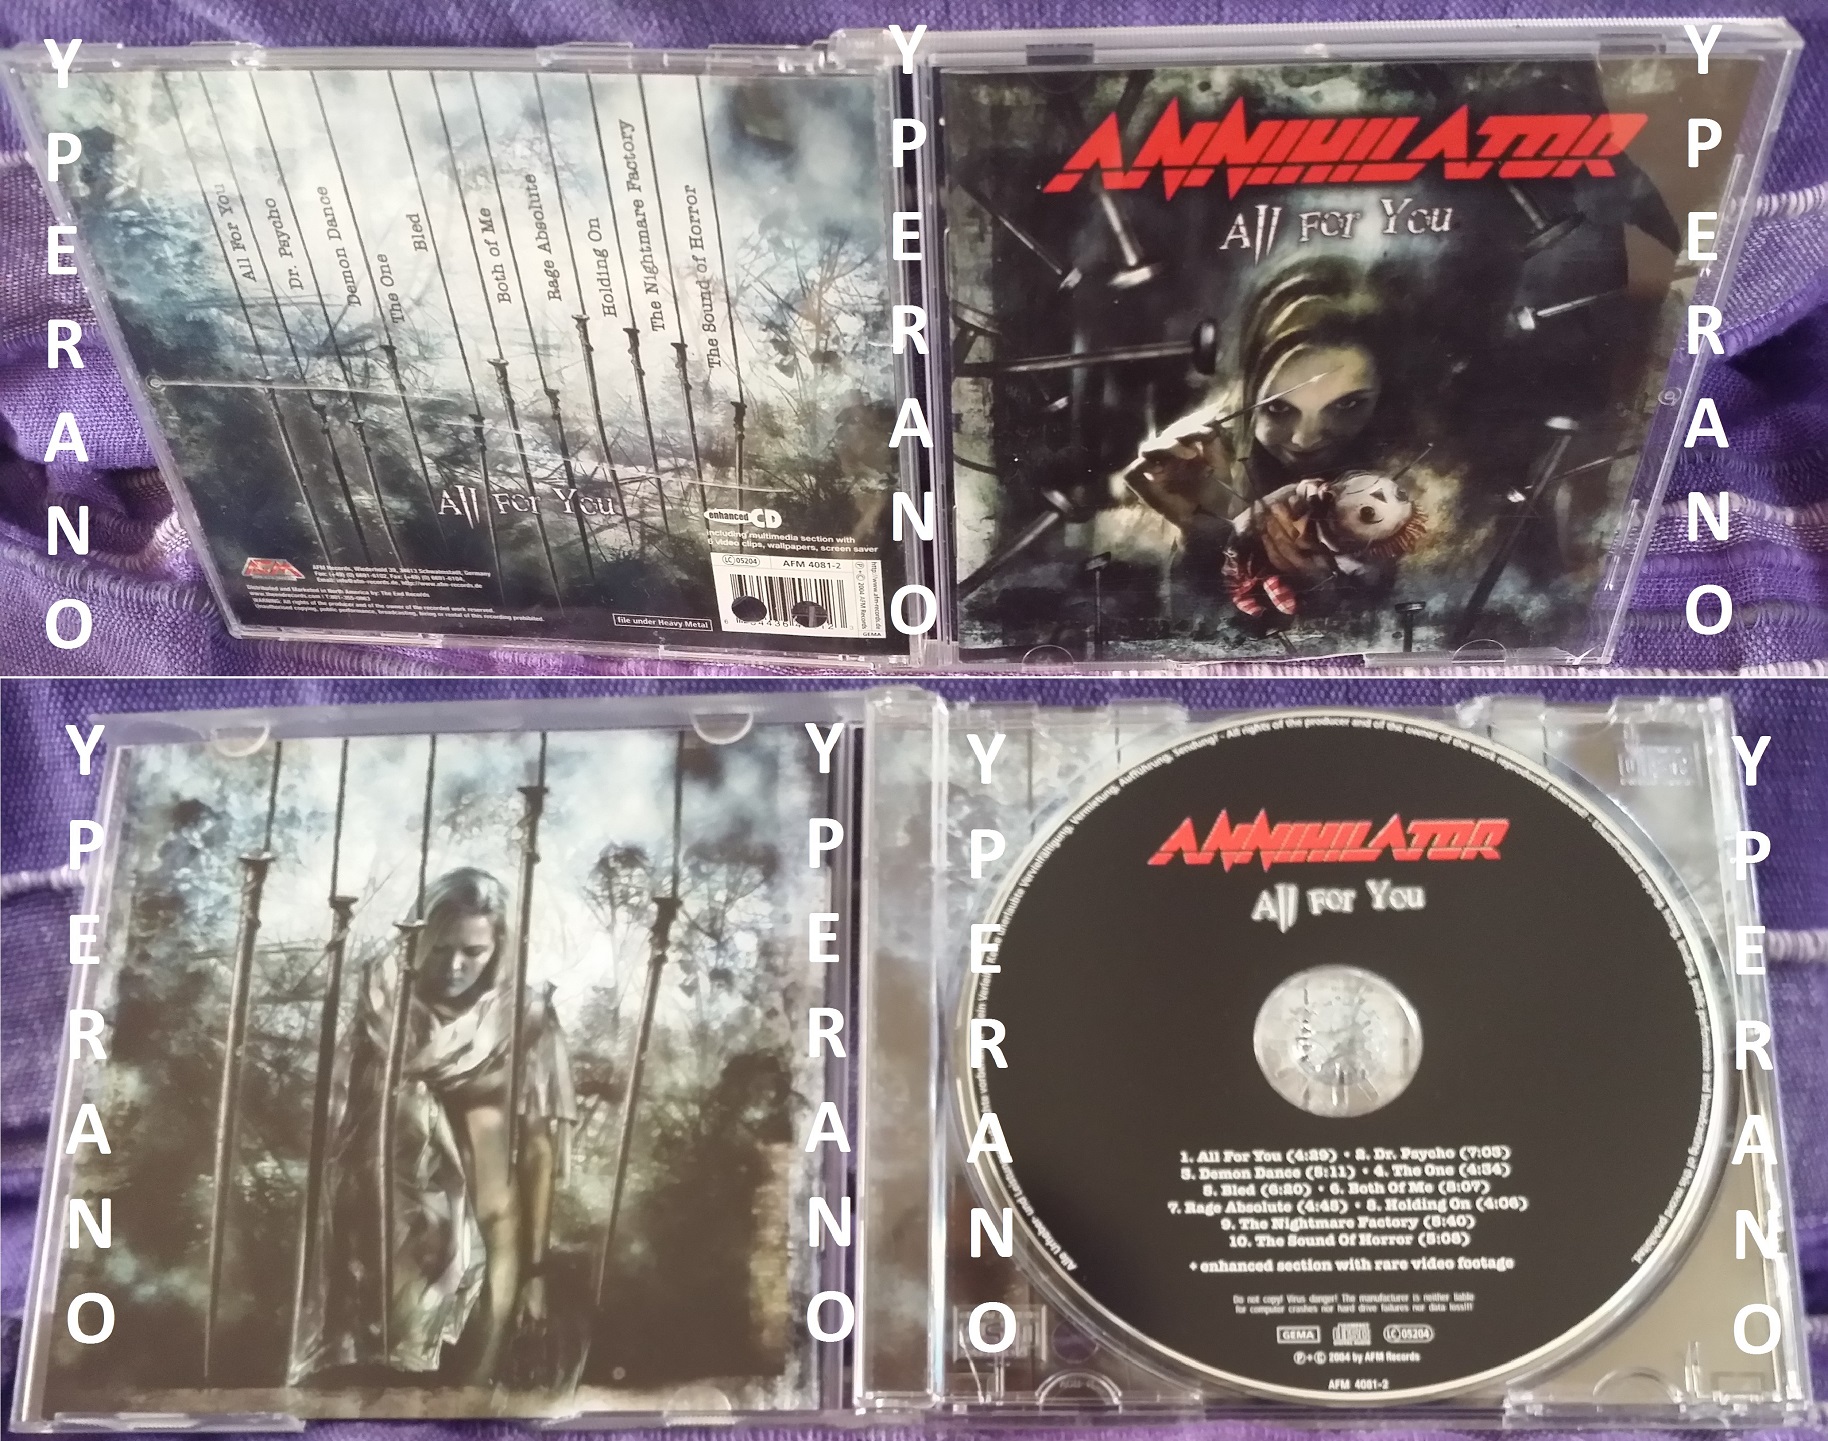 ANNIHILATOR: All for You CD Enhanced with rare video footage (6 clips)  Dream Theater drummer!! Check videos - Yperano Records